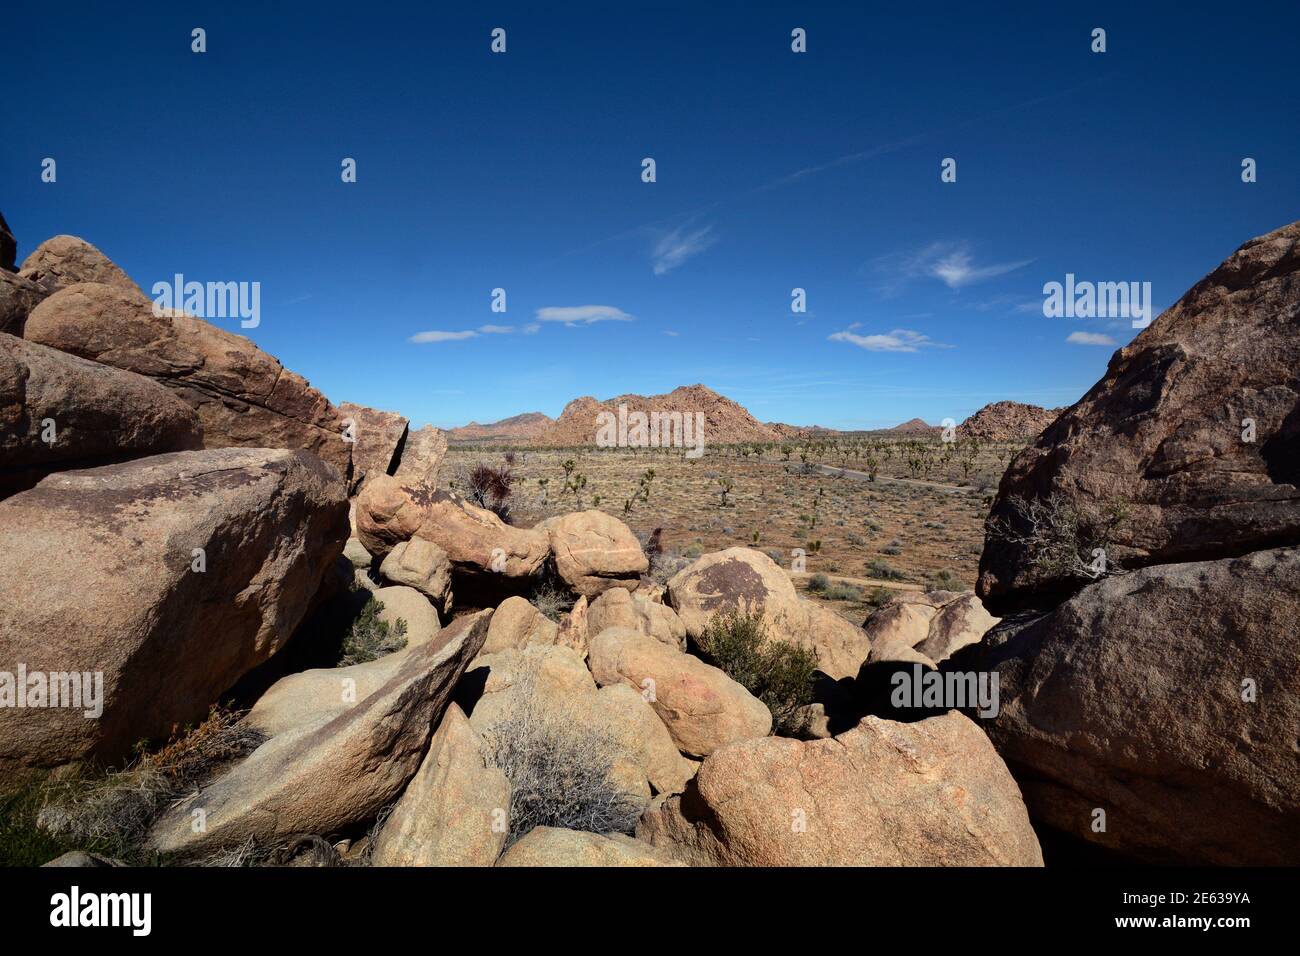 Huge granite outcroppings and boulders compete with Joshua trees as ...